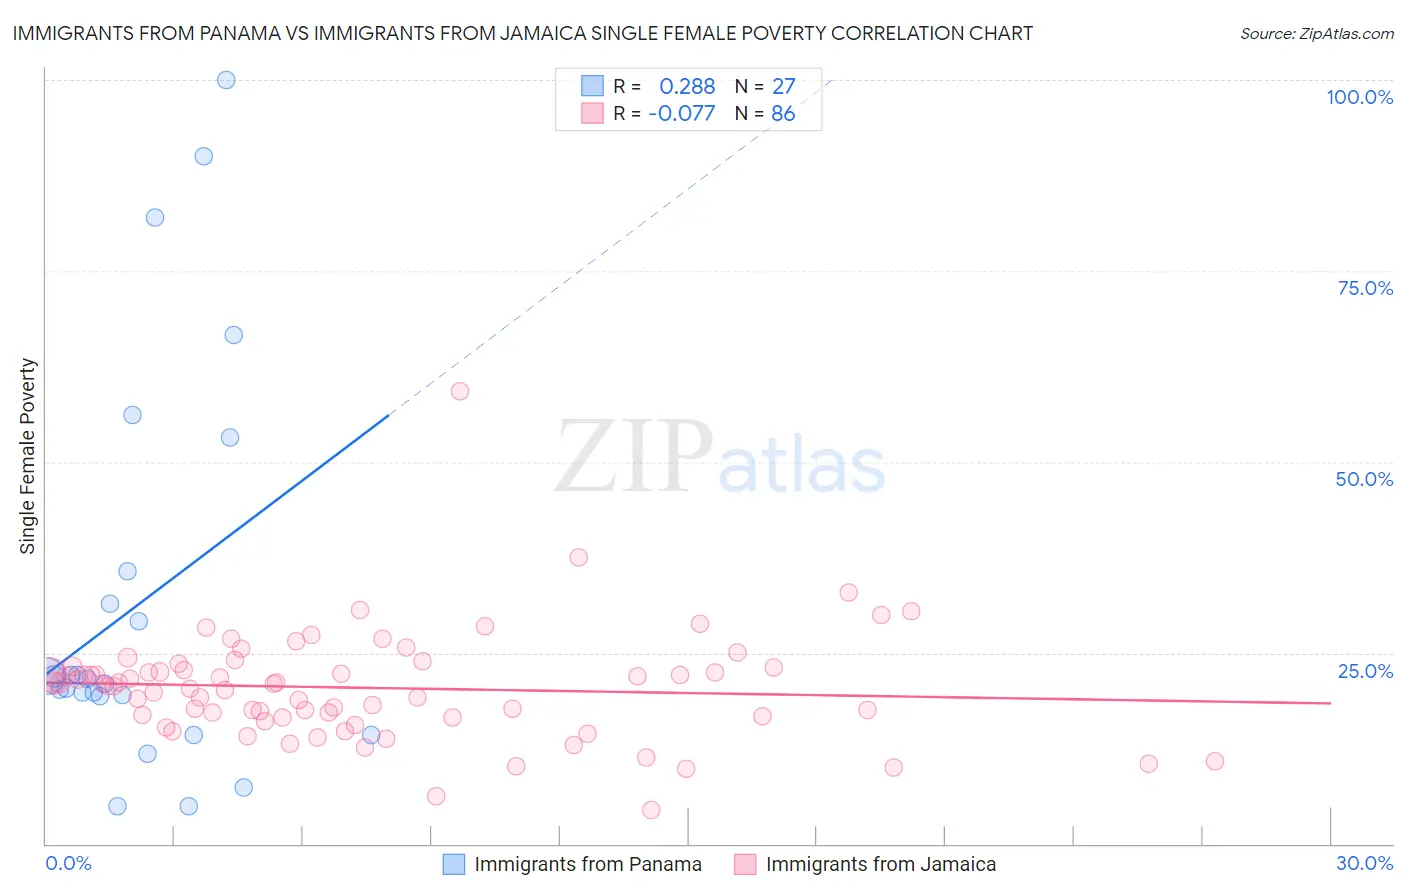 Immigrants from Panama vs Immigrants from Jamaica Single Female Poverty